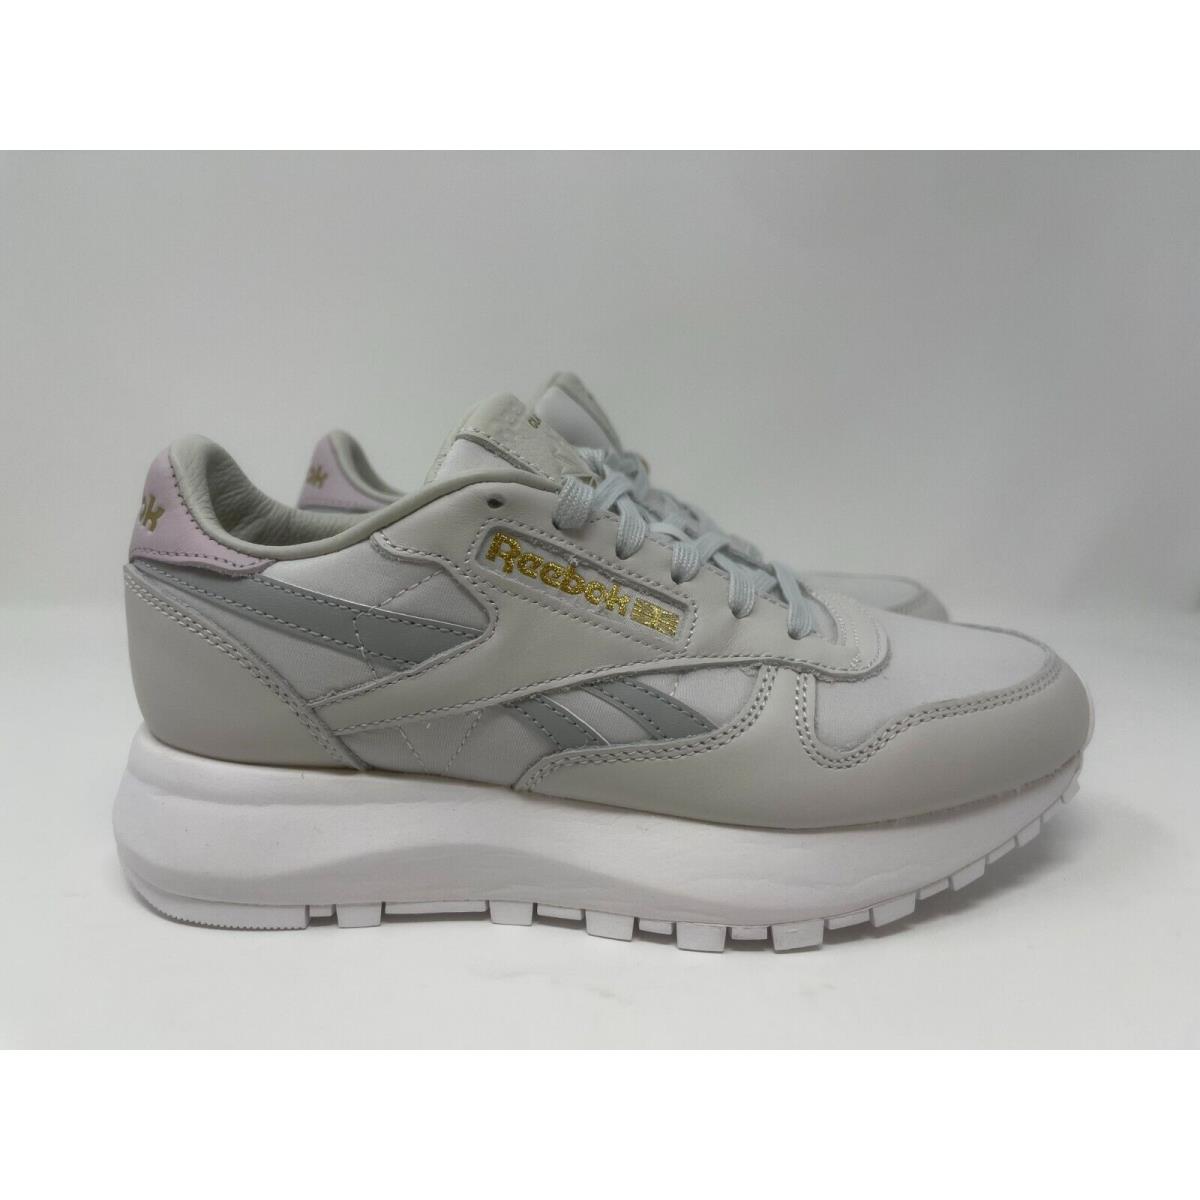 Reebok shoes Classic Leather - Gray 0